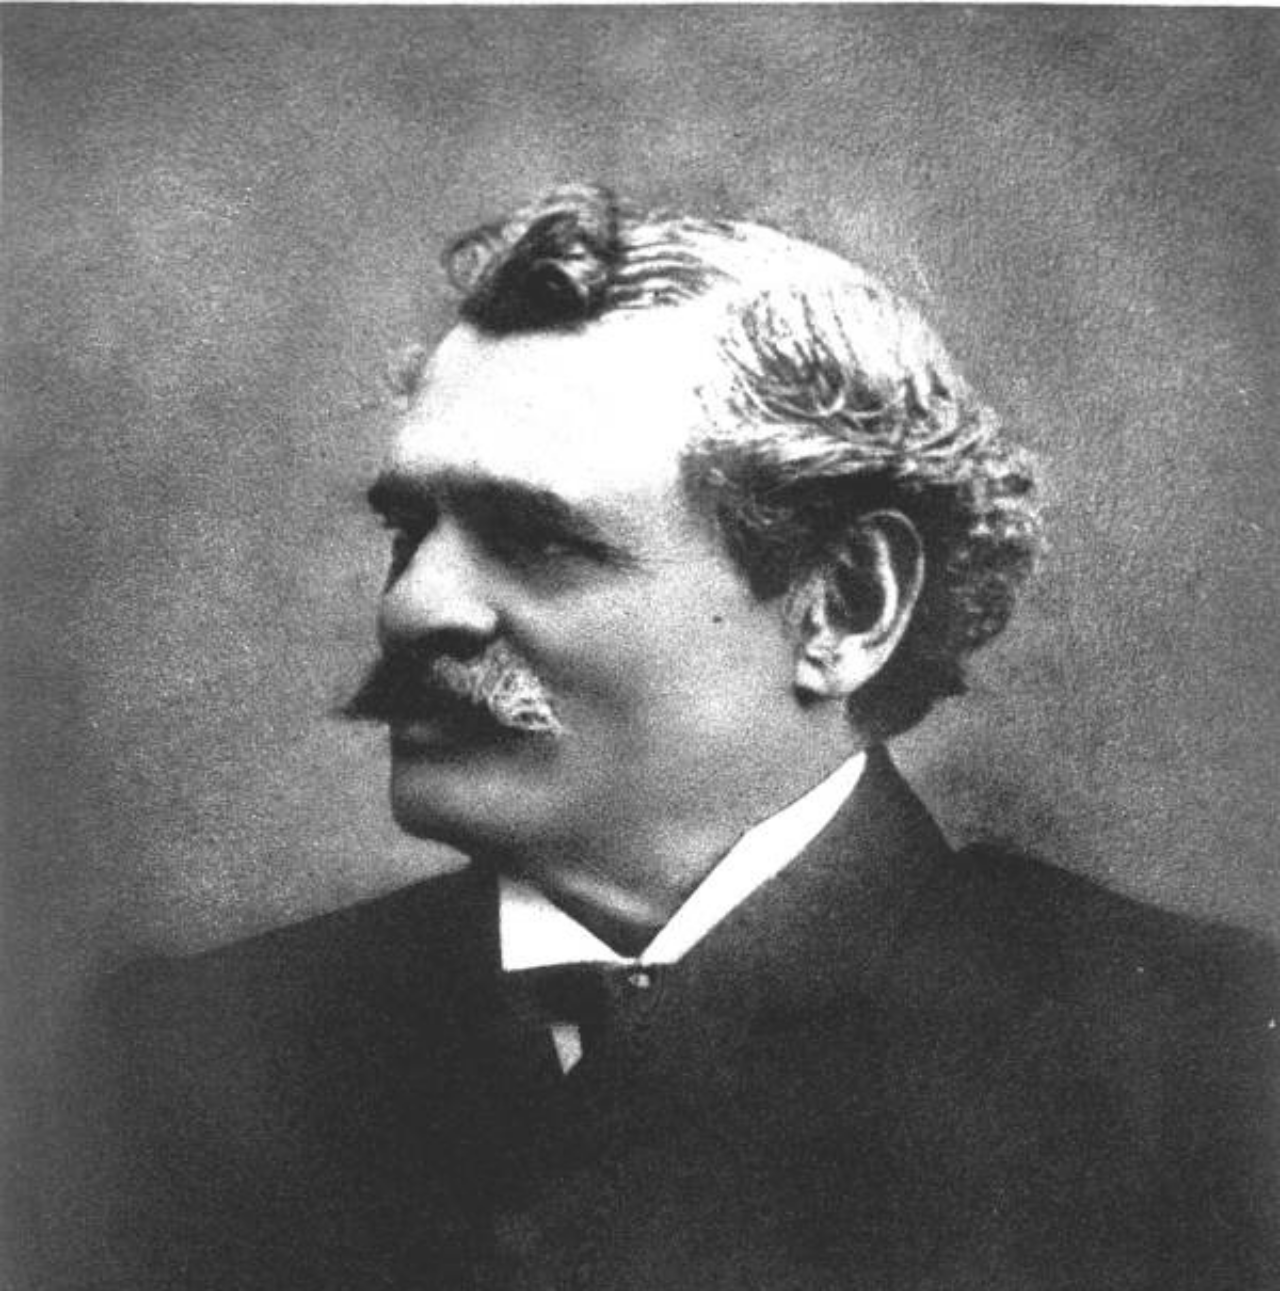 Vintage black and white photograph of a mustached man